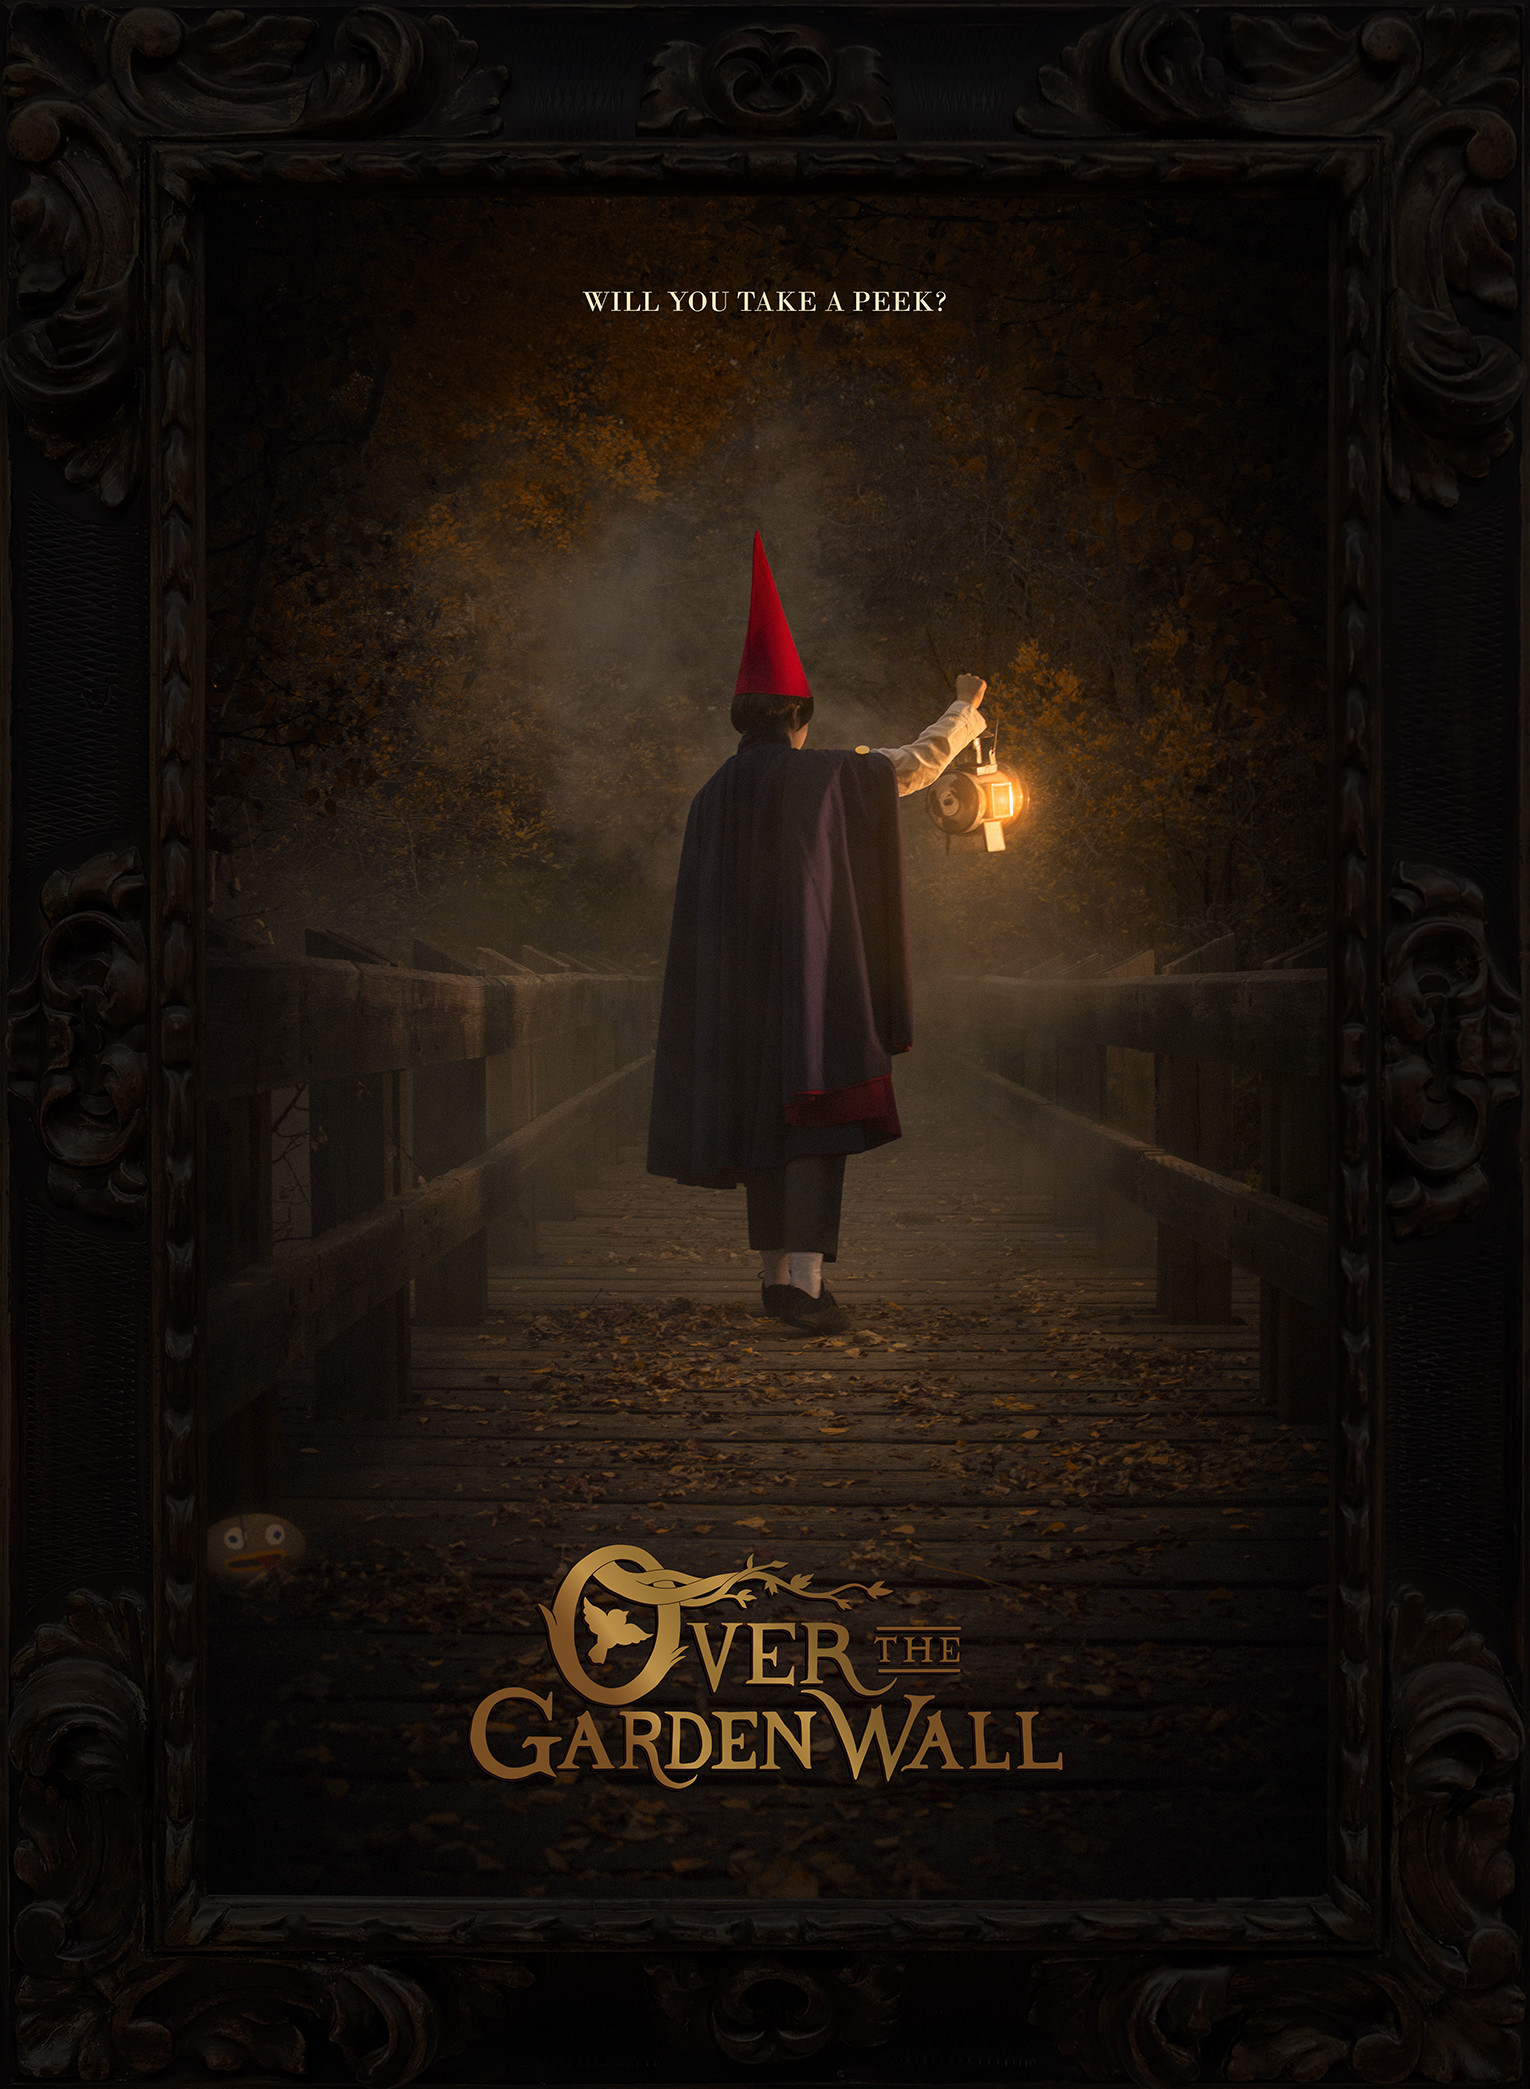 Over the Garden Wall – Wikipedia